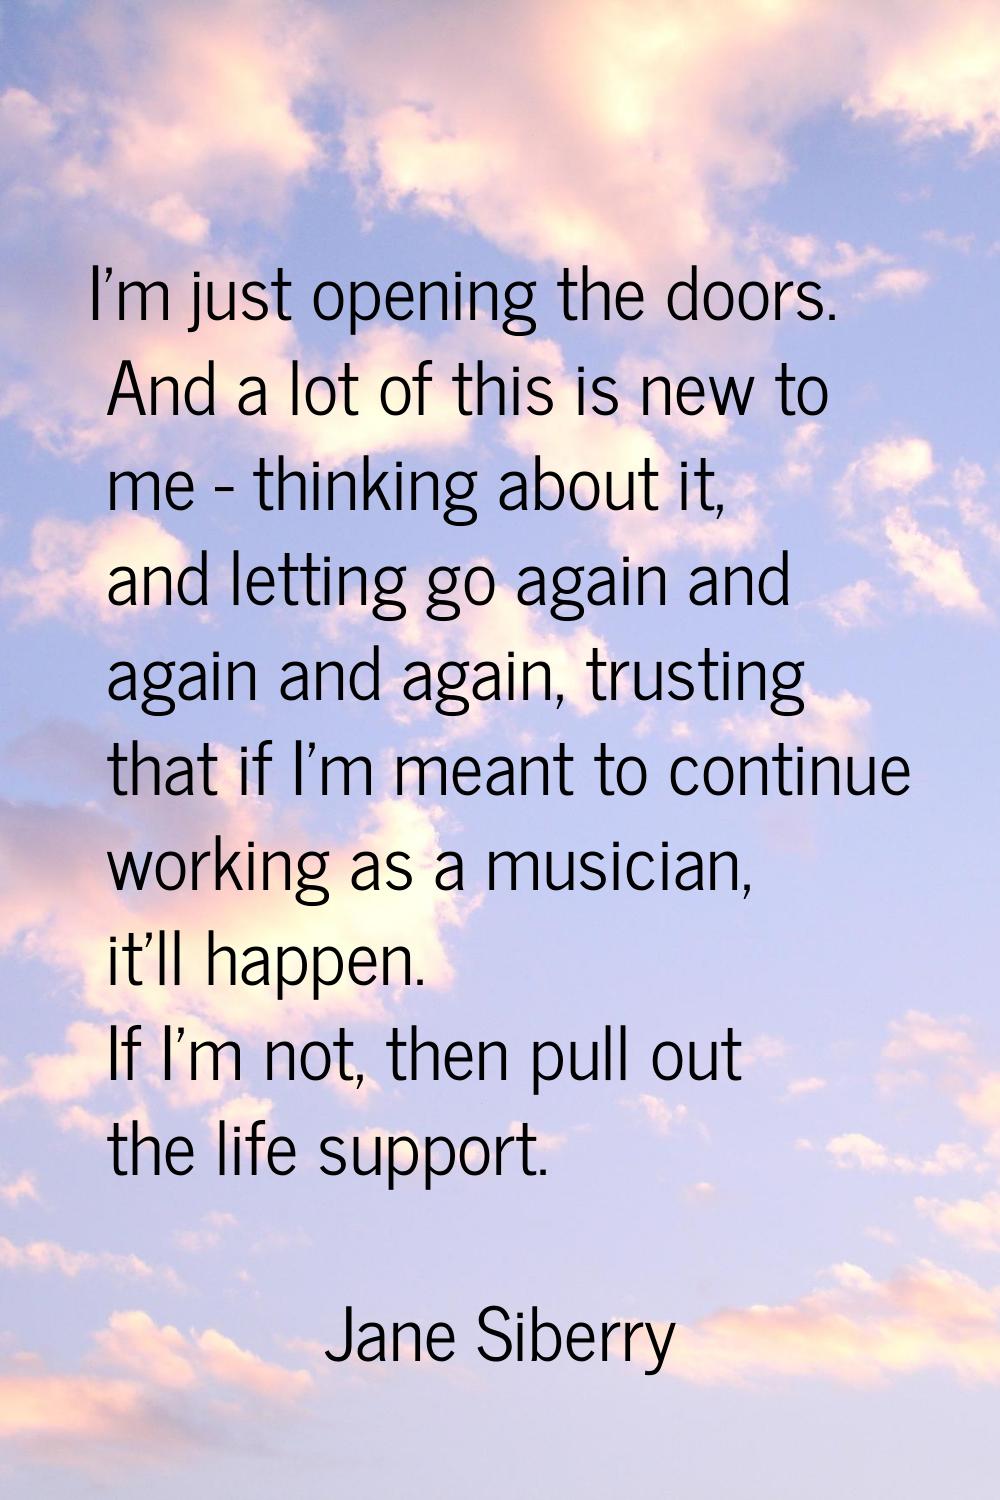 I'm just opening the doors. And a lot of this is new to me - thinking about it, and letting go agai